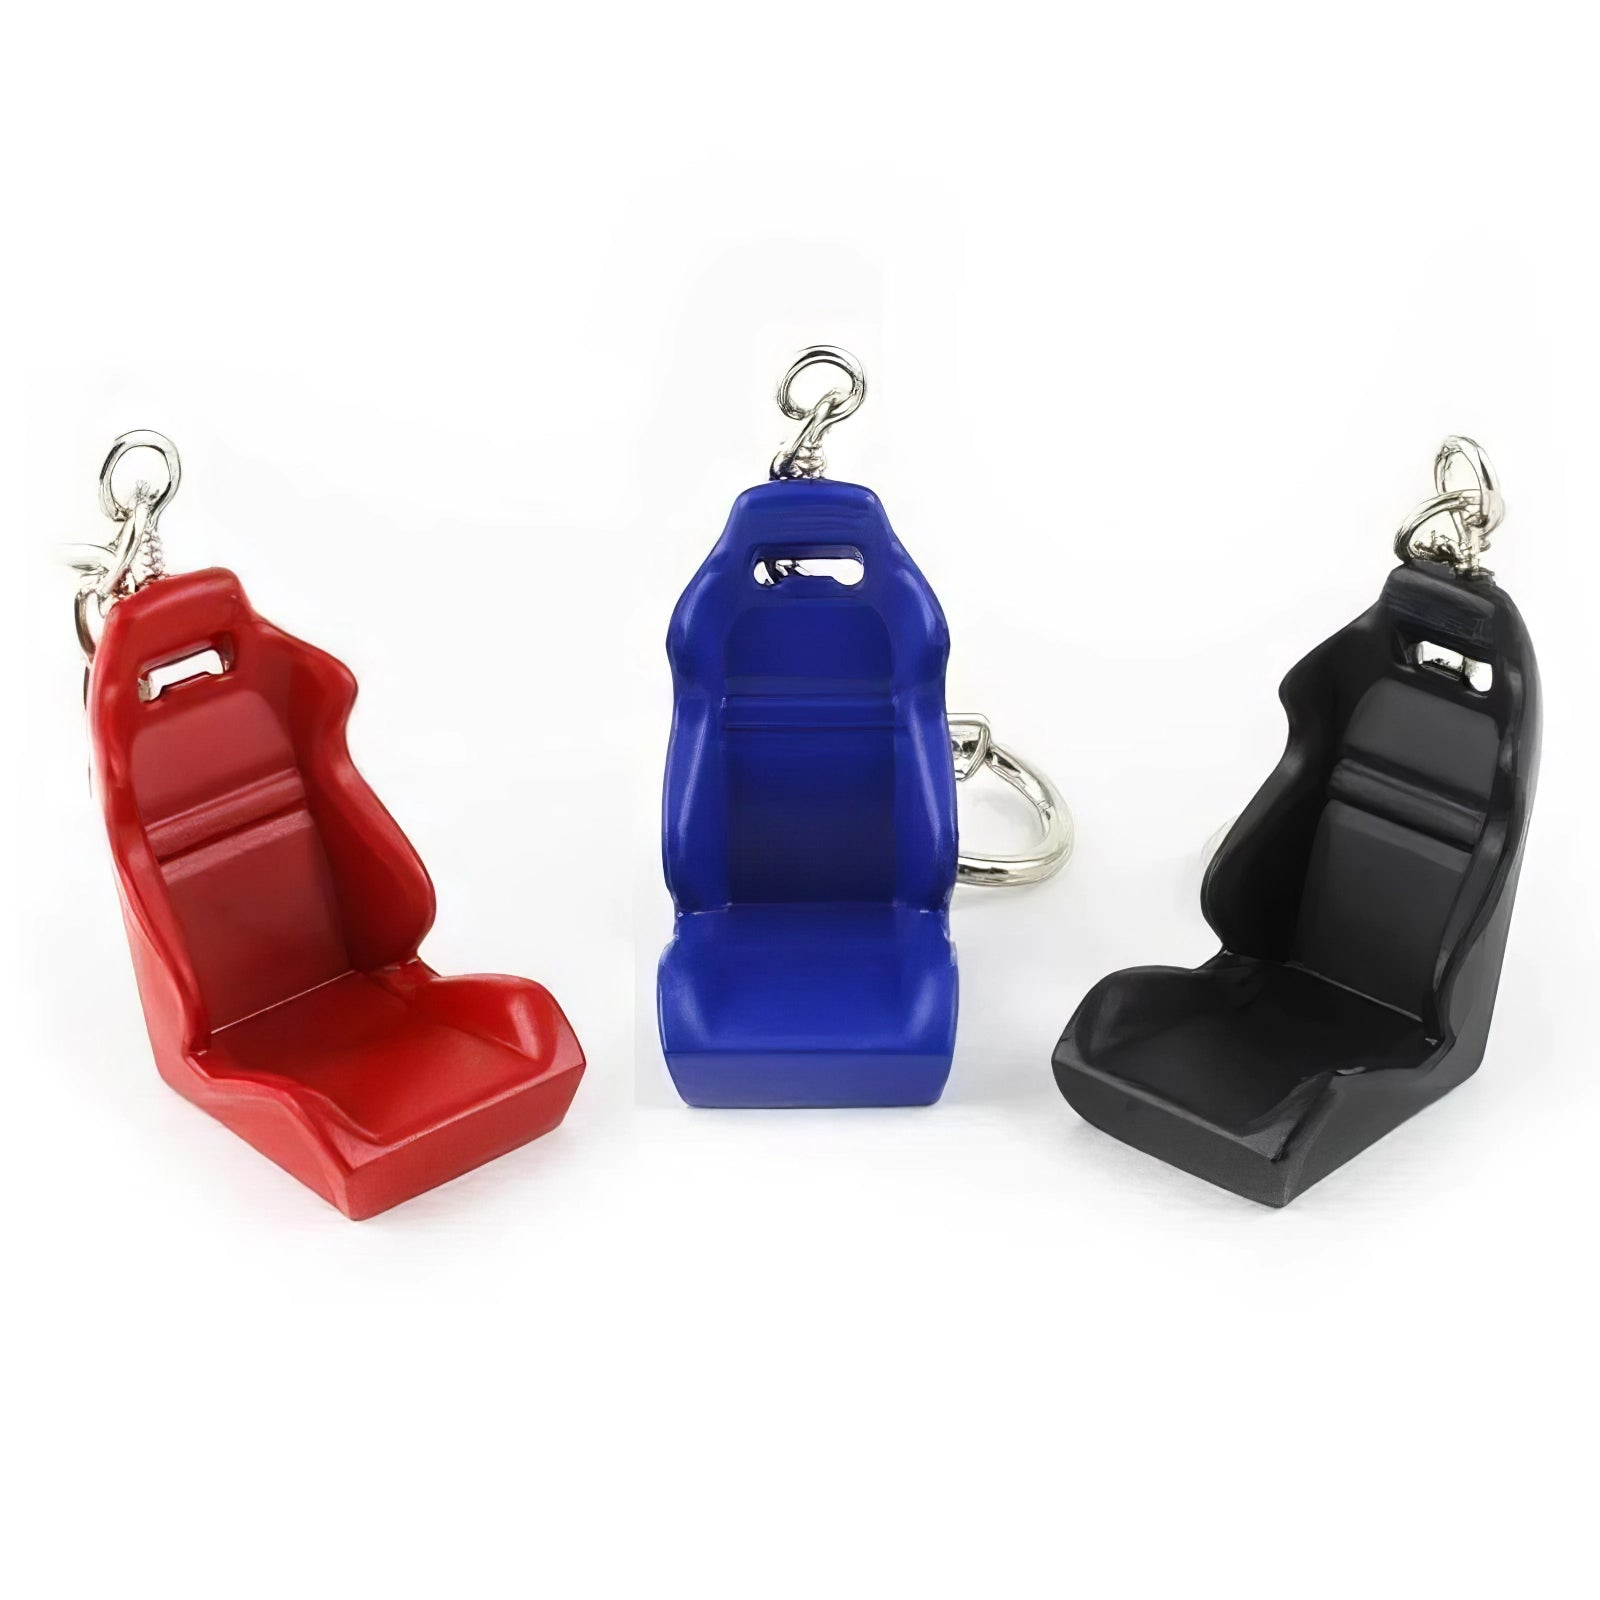 Racing seat car keychains in red, blue, and black.